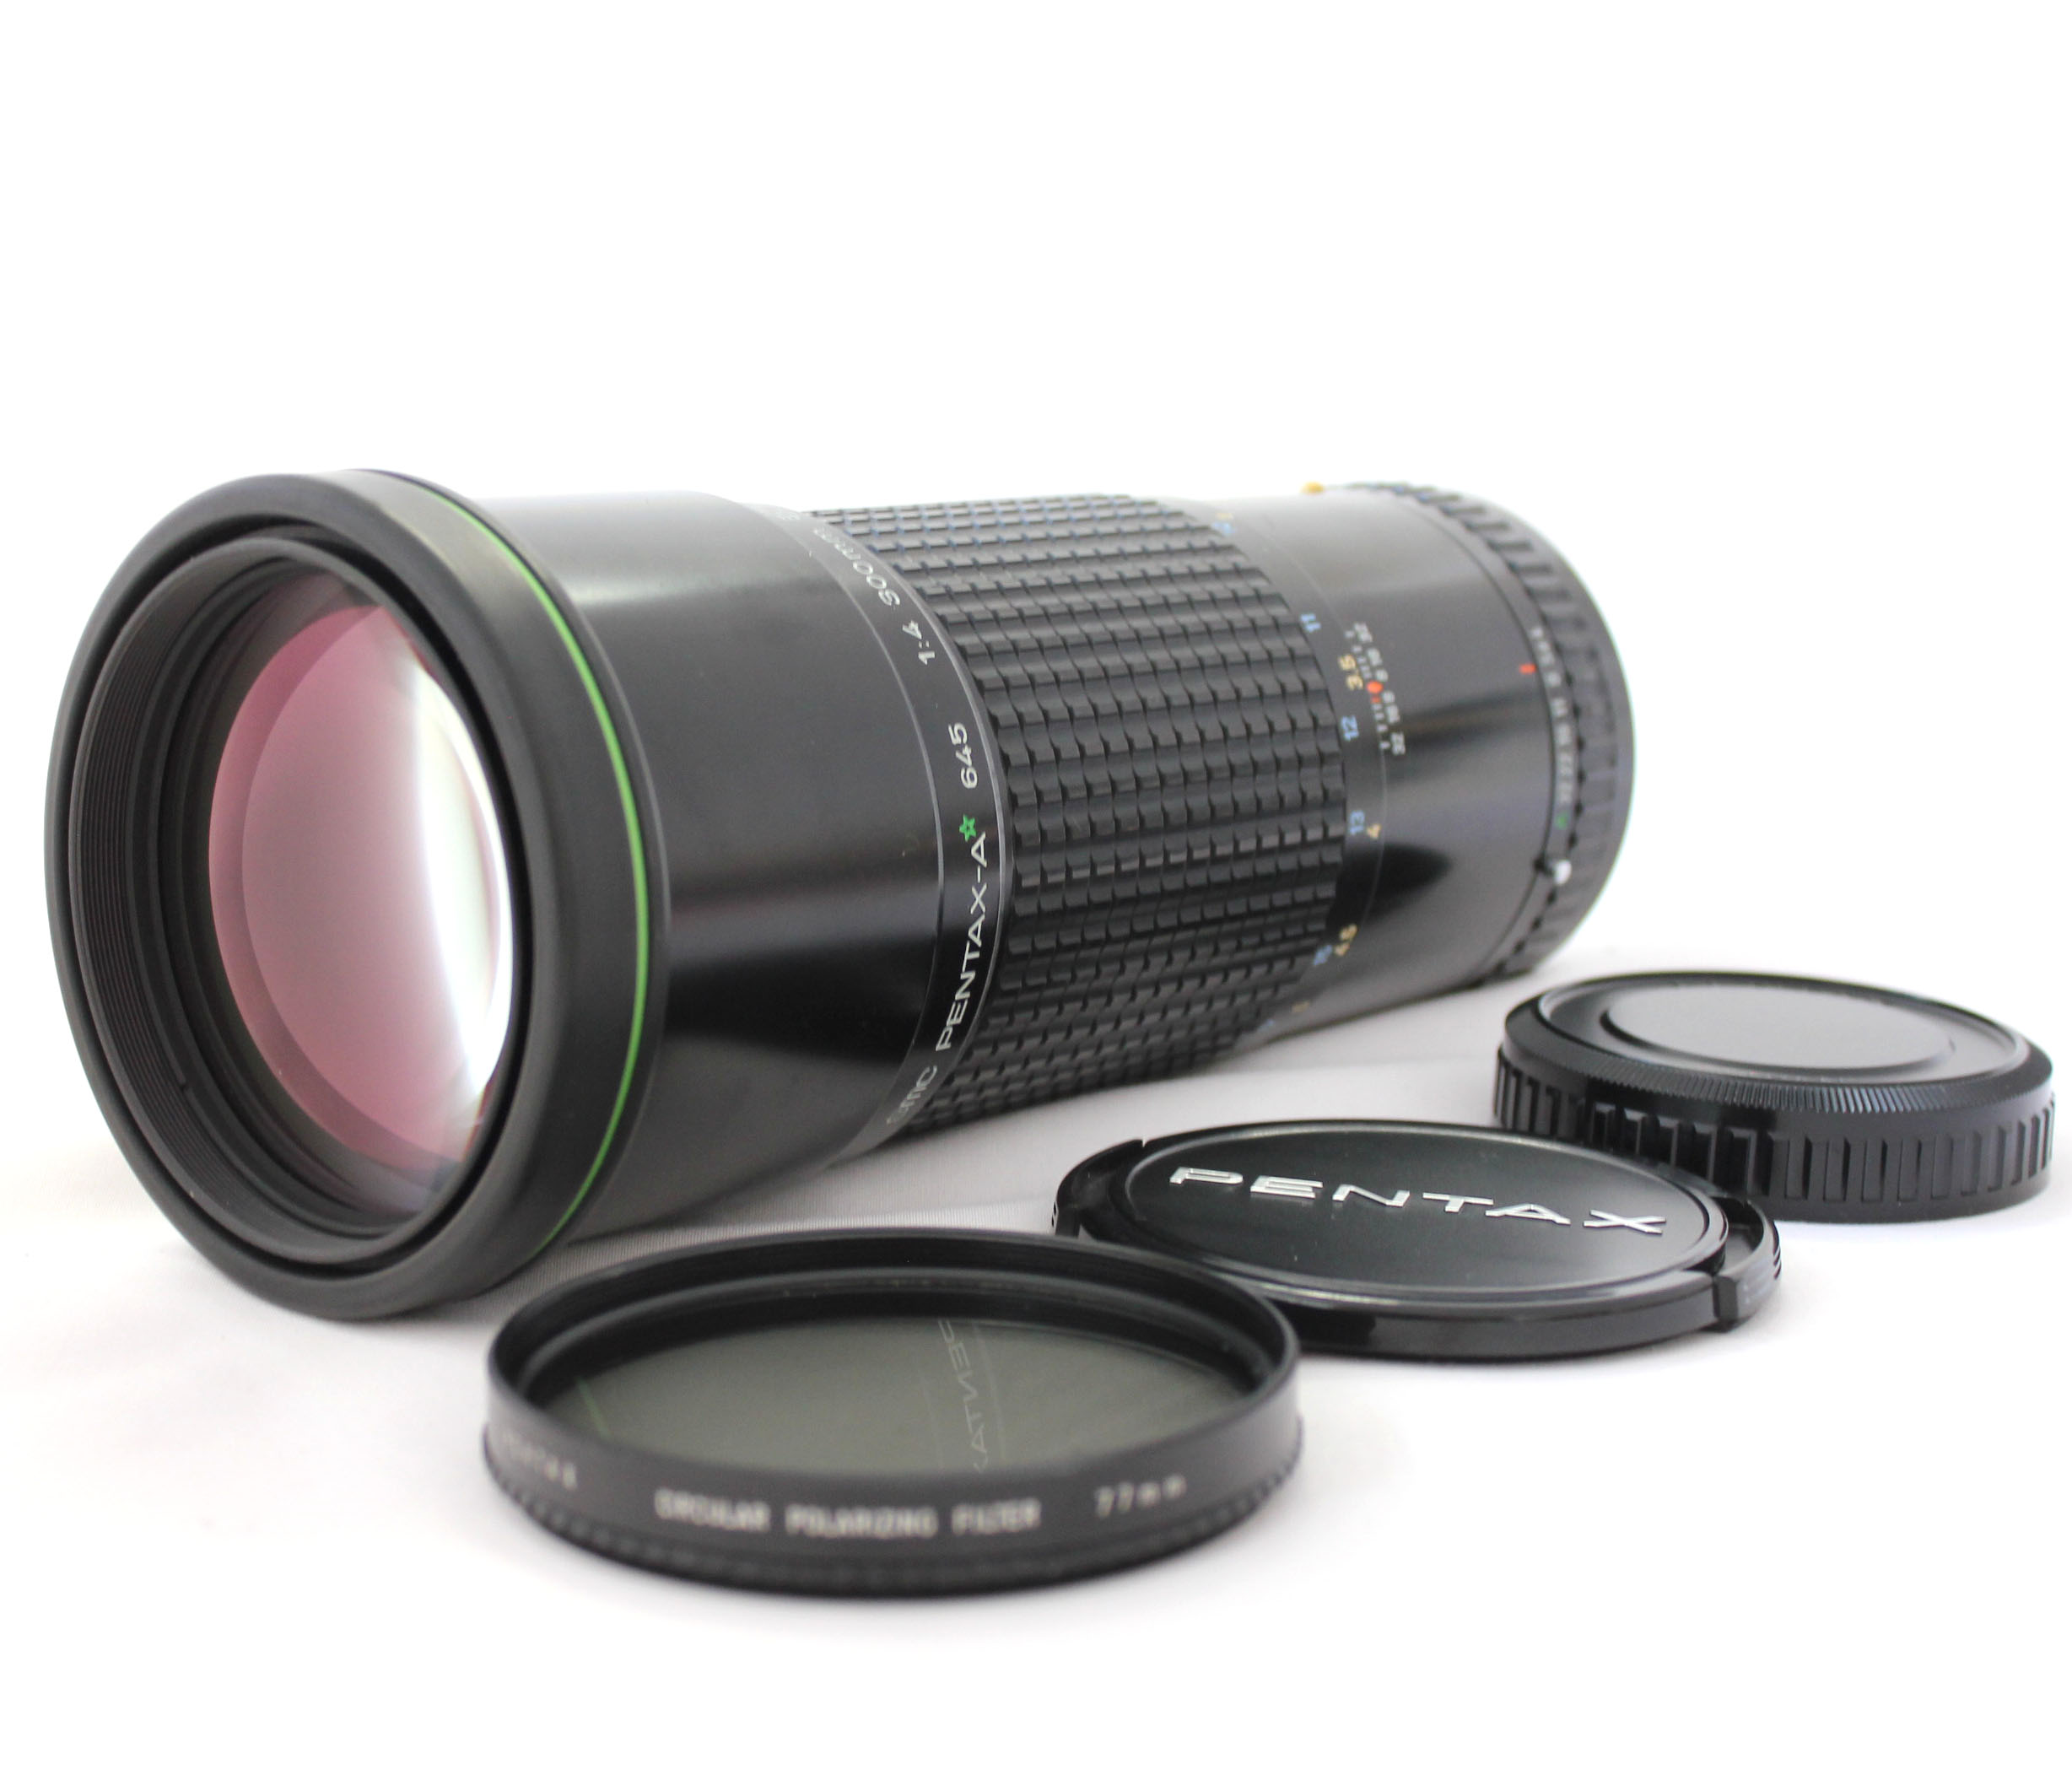 Japan Used Camera Shop | SMC Pentax-A * 645 300mm F/4 ED IF Green Star MF Telephoto Lens from Japan